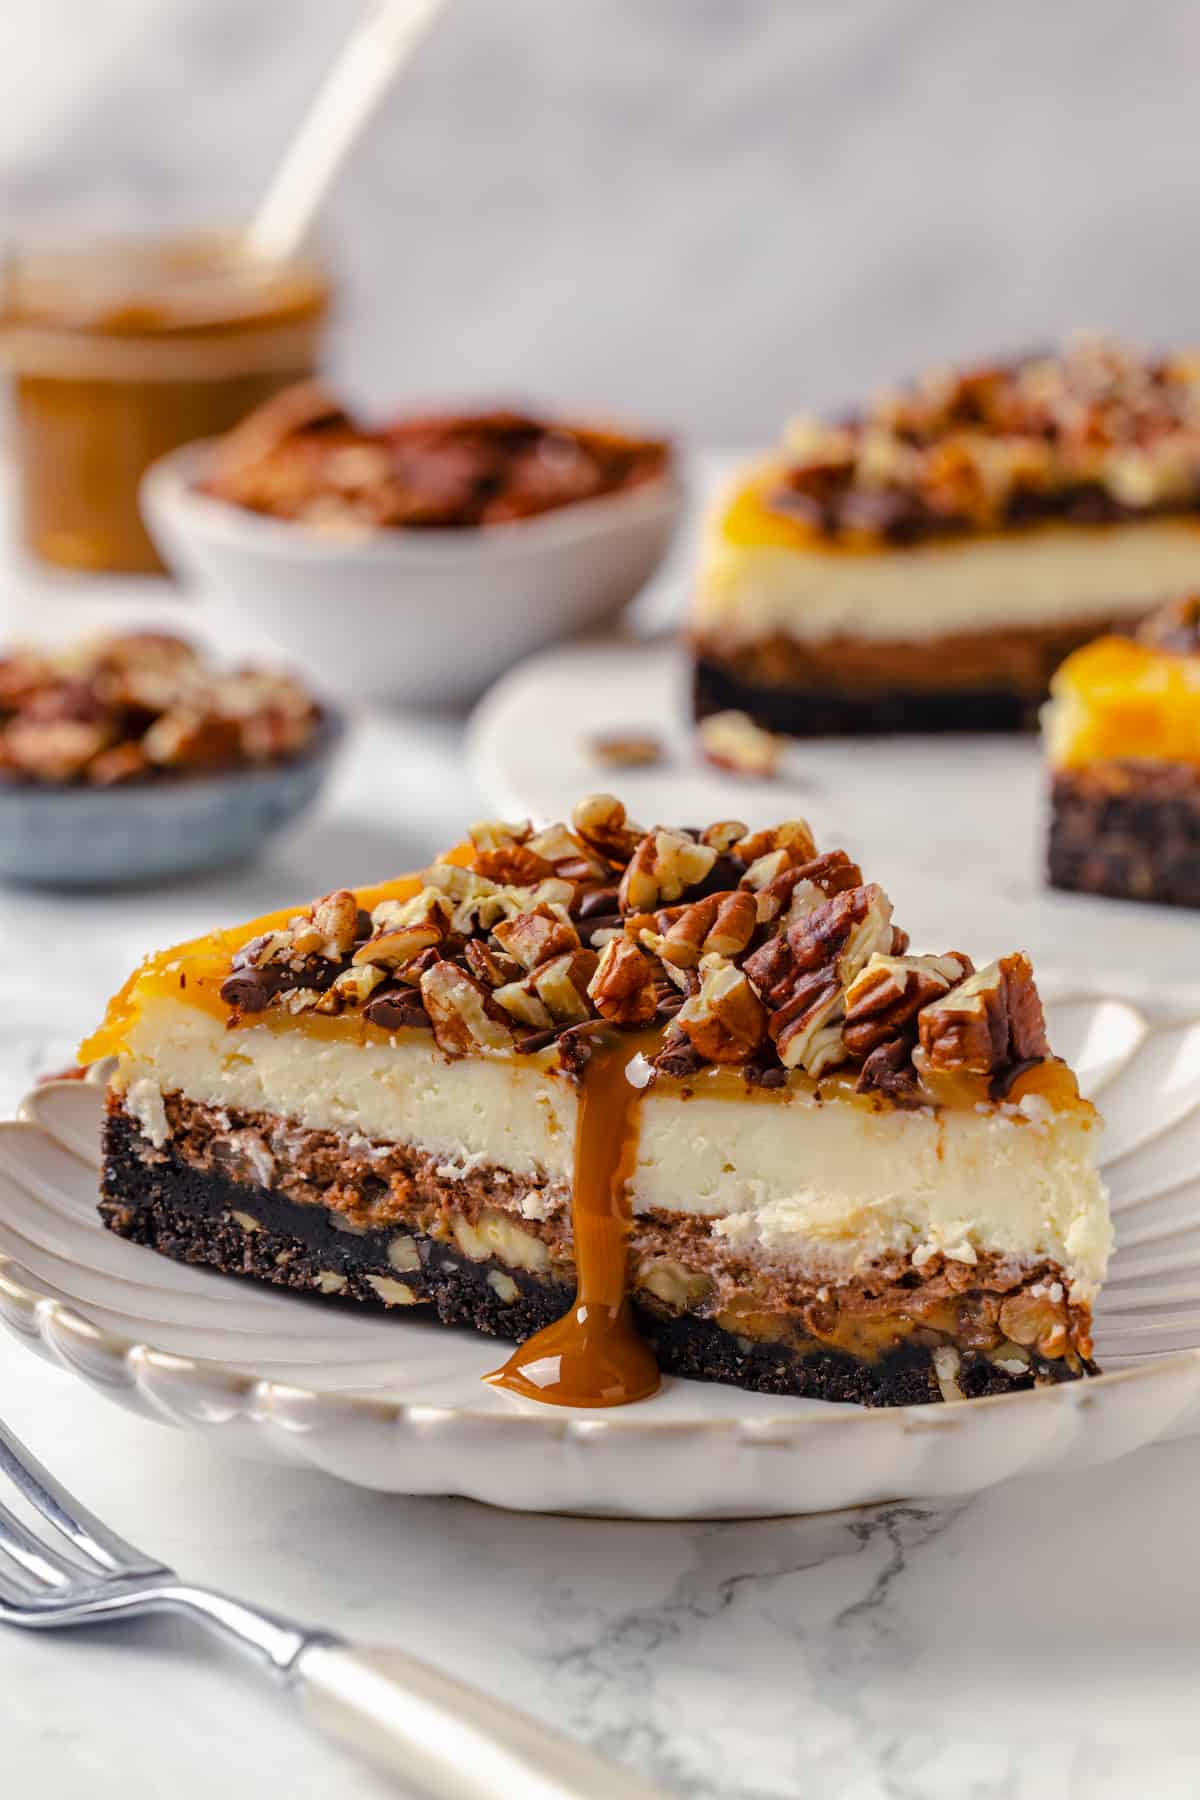 Side view of turtle cheesecake on plate